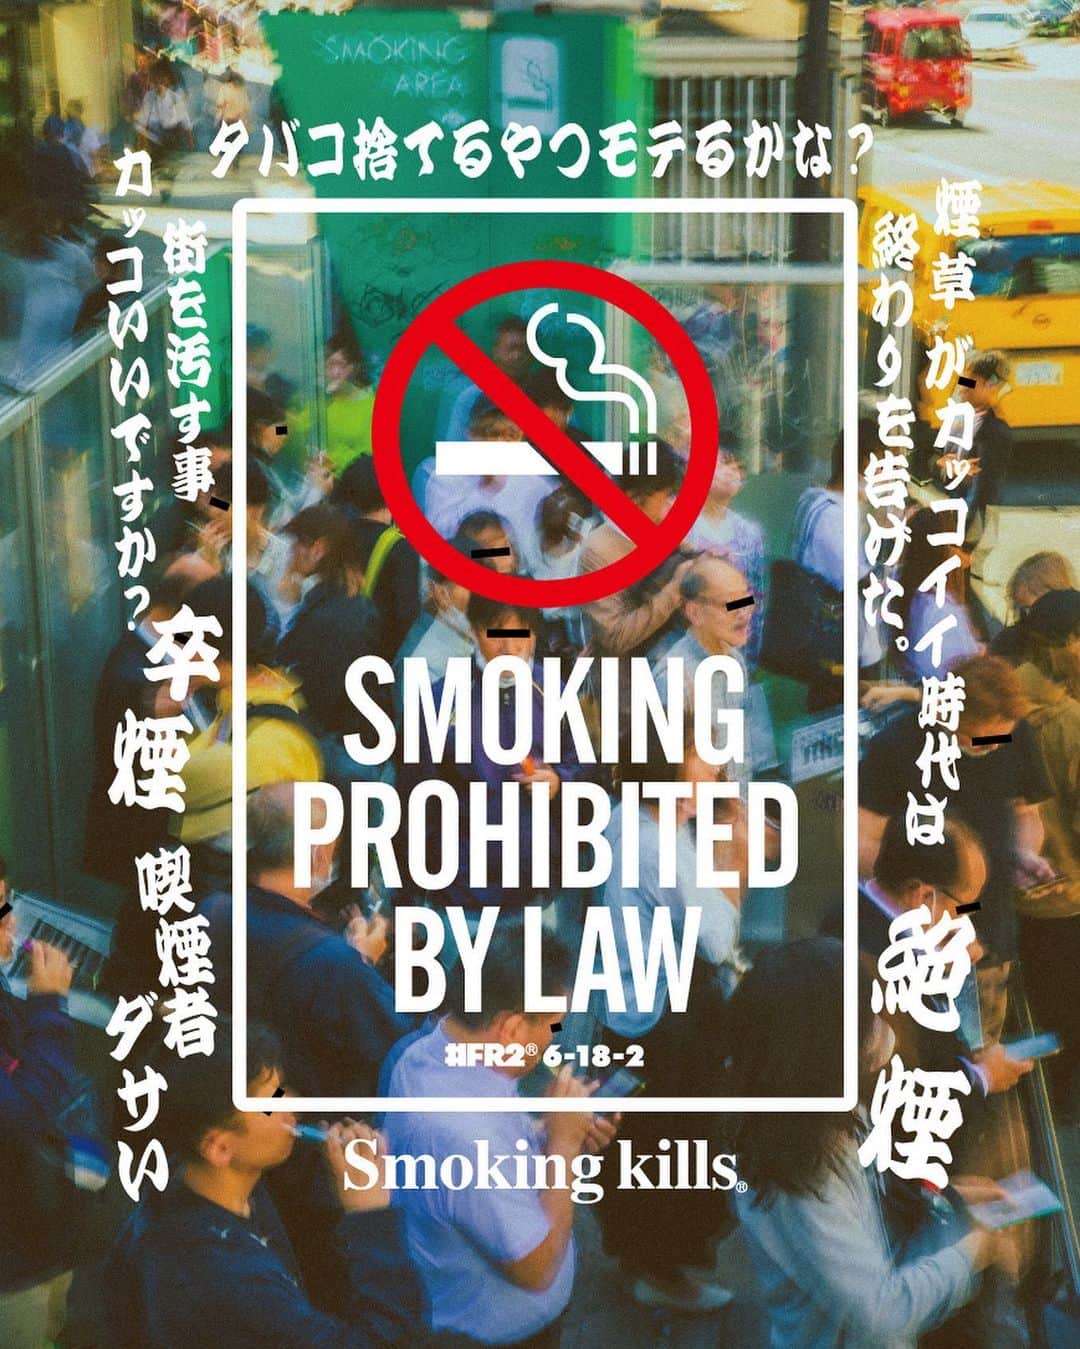 #FR2さんのインスタグラム写真 - (#FR2Instagram)「In 1988, on the 40th anniversary of the establishment of the World Health Organization (WHO), it was recognized that smoking has significant impacts on public health on a global scale. Considering the dangers of secondhand smoke and the addictive nature of nicotine, smoking is not just a matter of personal preference but a health issue that extends to the prevention of lifestyle diseases and the suppression of underage smoking. Since then, every year on May 31st, it has been designated as “World No Tobacco Day” (WNTD). This year, #FR2 presents T-shirts and caps featuring the slogan “Smoking kills.”  ■ Release Details #FR2 ONLINE STORE From May 31, 2023 (Wed), 12:00 AM JST  #FR2 Direct Stores May 31, 2023 (Wed), OPEN ※ There may be purchase restrictions at physical stores.  We ship worldwide.  世界保健機関(WHO)の設立40周年にあたる1988年、「世界的規模で喫煙が公衆の健康に与える影響は大きい上、受動喫煙の危険性やニコチンの依存性を踏まえると喫煙習慣は個人の嗜好にとどまらない健康問題であり、生活習慣病の予防や未成年の喫煙を抑制する上でも、たばこ対策は重要な課題になっている」とし、それから毎年5月31日を”World No Tobacco Day(WNTD/世界禁煙デー)”として定められている中で、「Smoking kills」を掲げる#FR2 から今年はTシャツとキャップが登場。  Ellipse Logo T-shirt ¥7,700  ”Ellipse Logo Six panel Cap ¥6,600  ■発売詳細 #FR2 ONLINE STORE 2023/5/31（Wed） 0時〜  #FR2直営店 2023/5/31（Wed） OPEN ※店舗での販売は購入制限を設ける場合があります。  #FR2#fxxkingrabbits#頭狂色情兎 #smokingkills#smokingkills®#禁煙推奨#World No Tobacco Day」5月30日 18時13分 - fxxkingrabbits